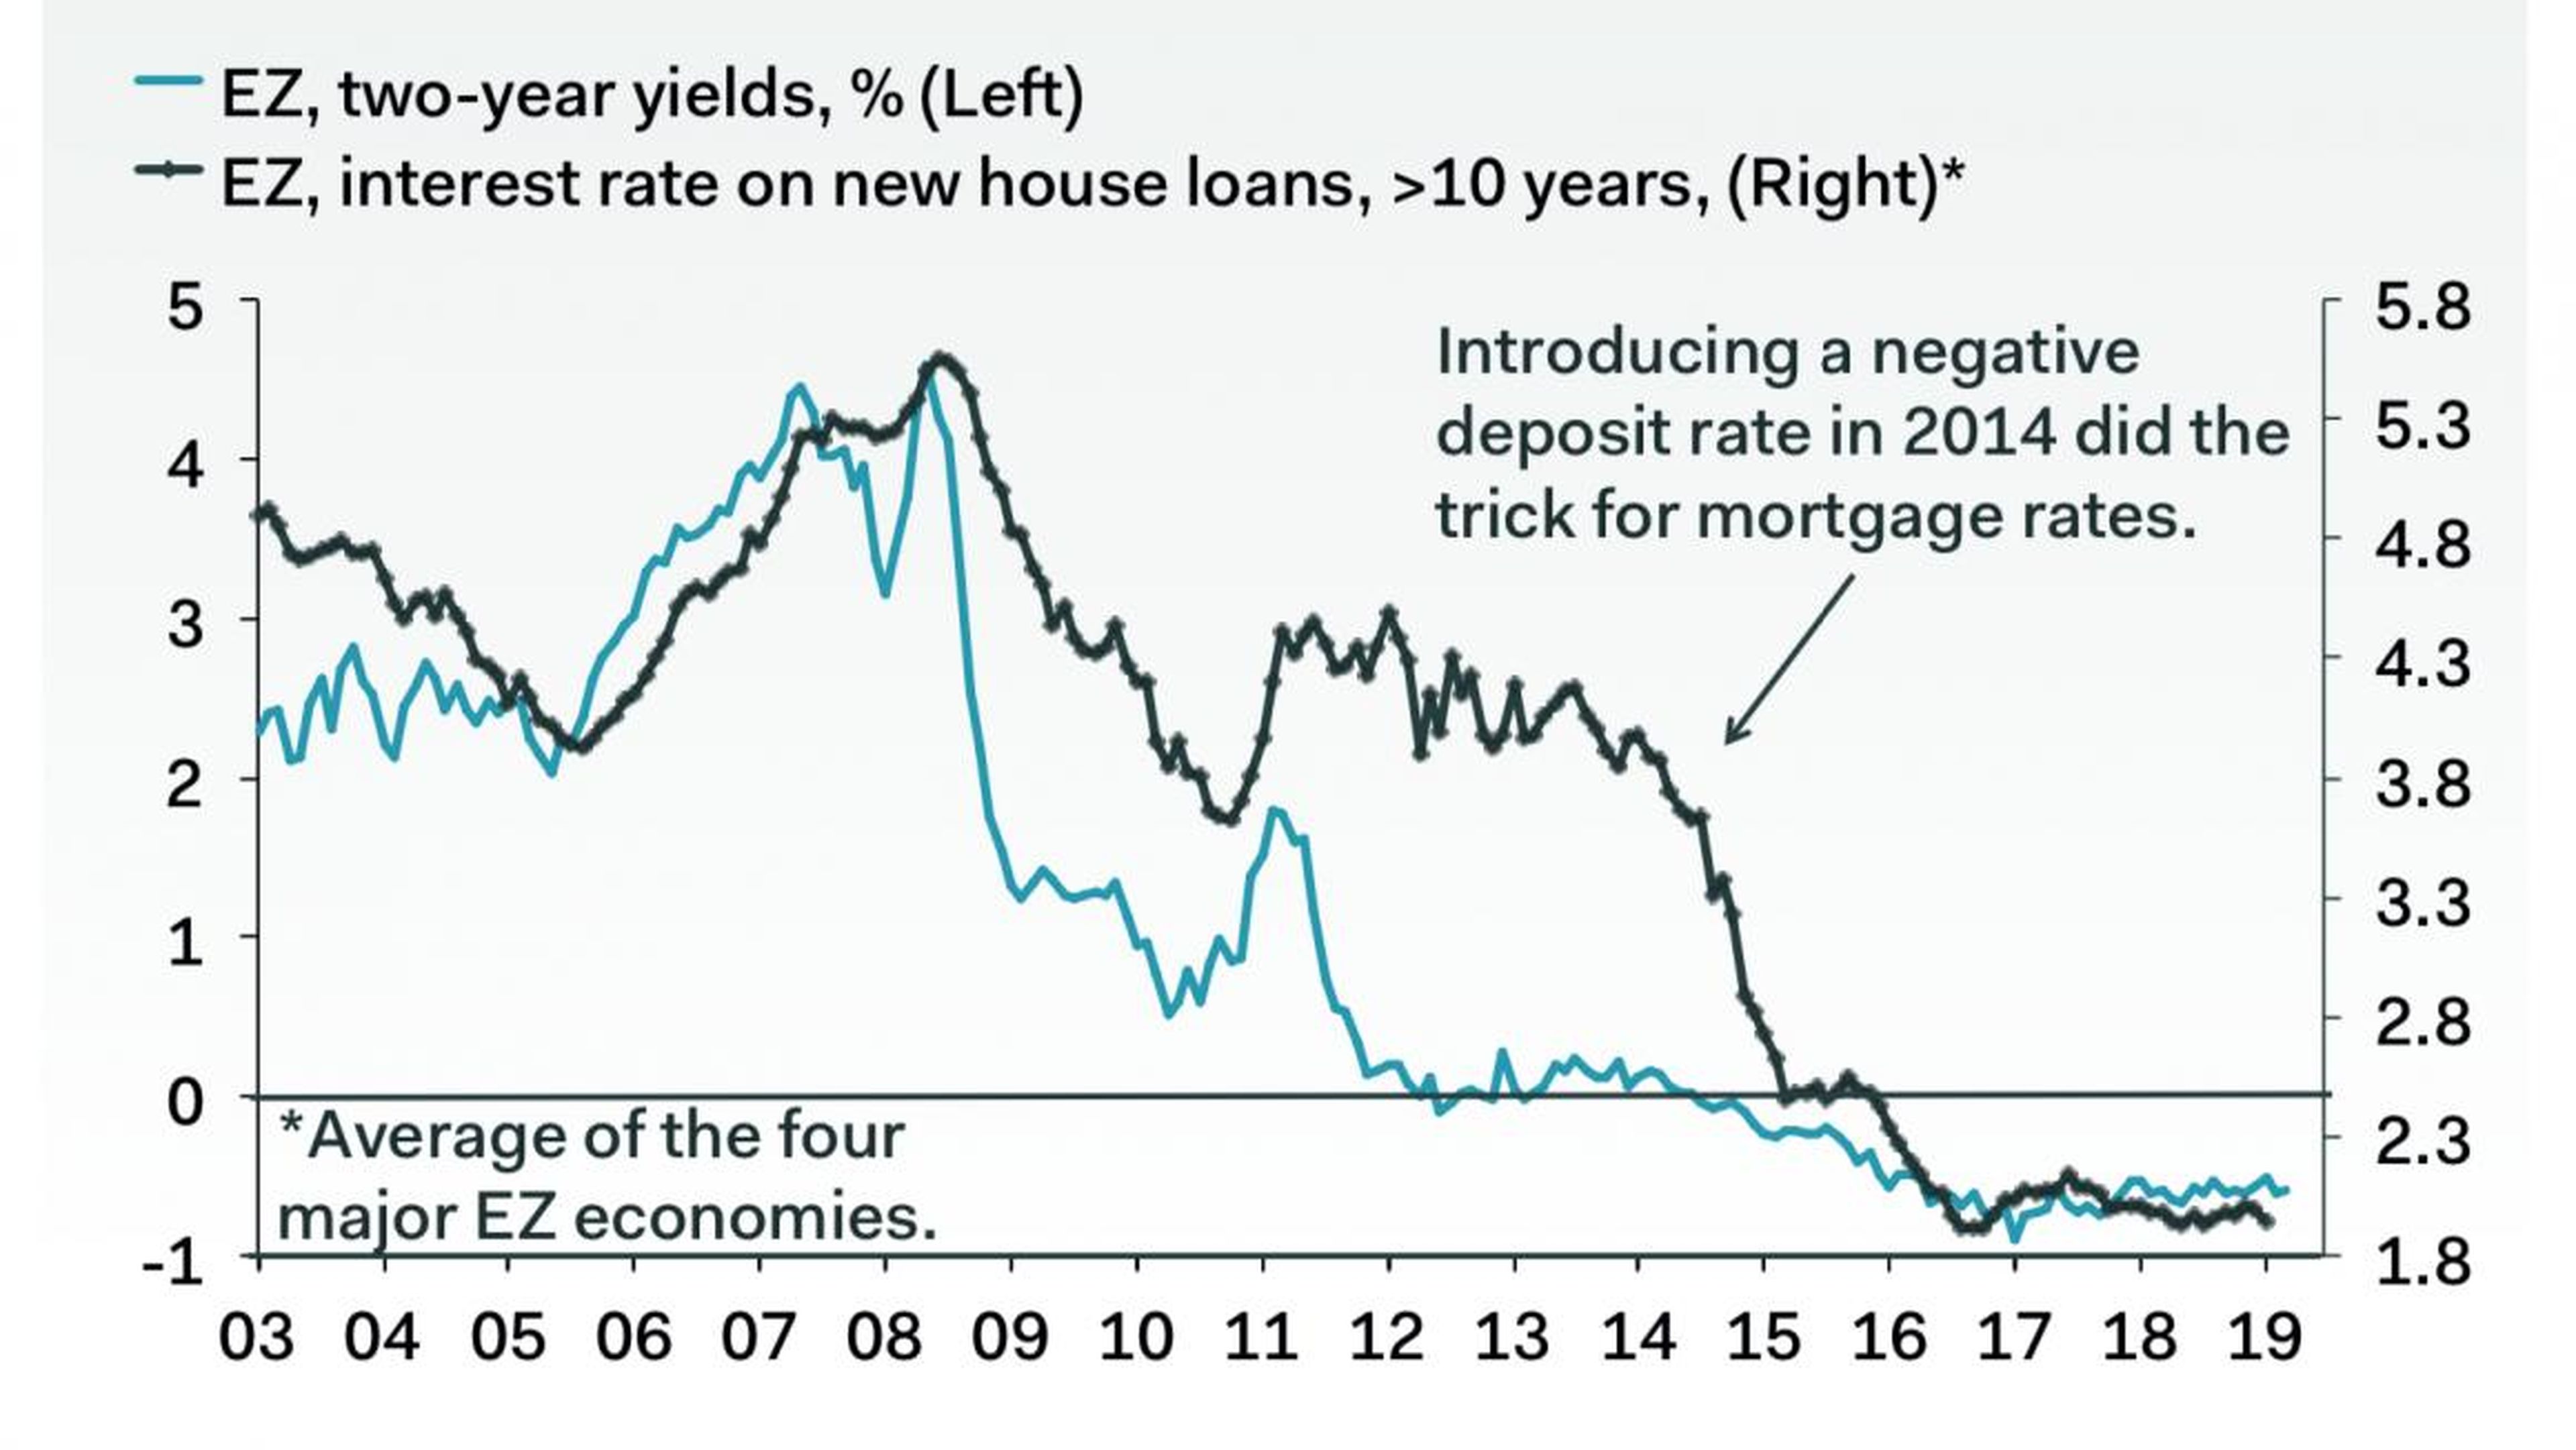 As yields on two-year bonds have declined, so have mortgage rates for homebuyers in Europe.